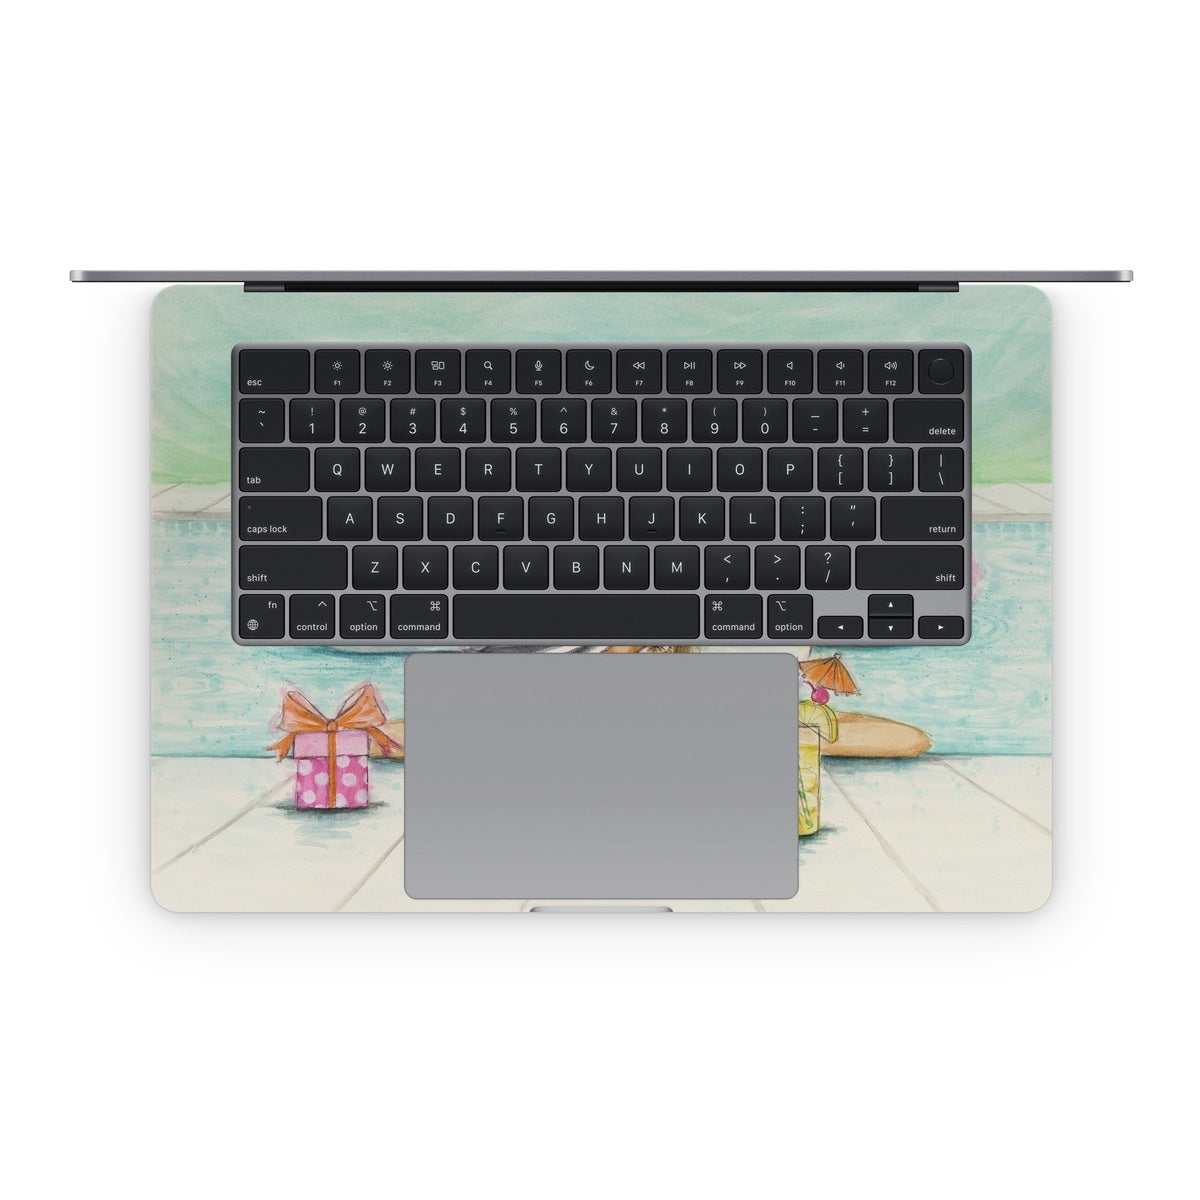 Delphine at the Pool Party - Apple MacBook Skin